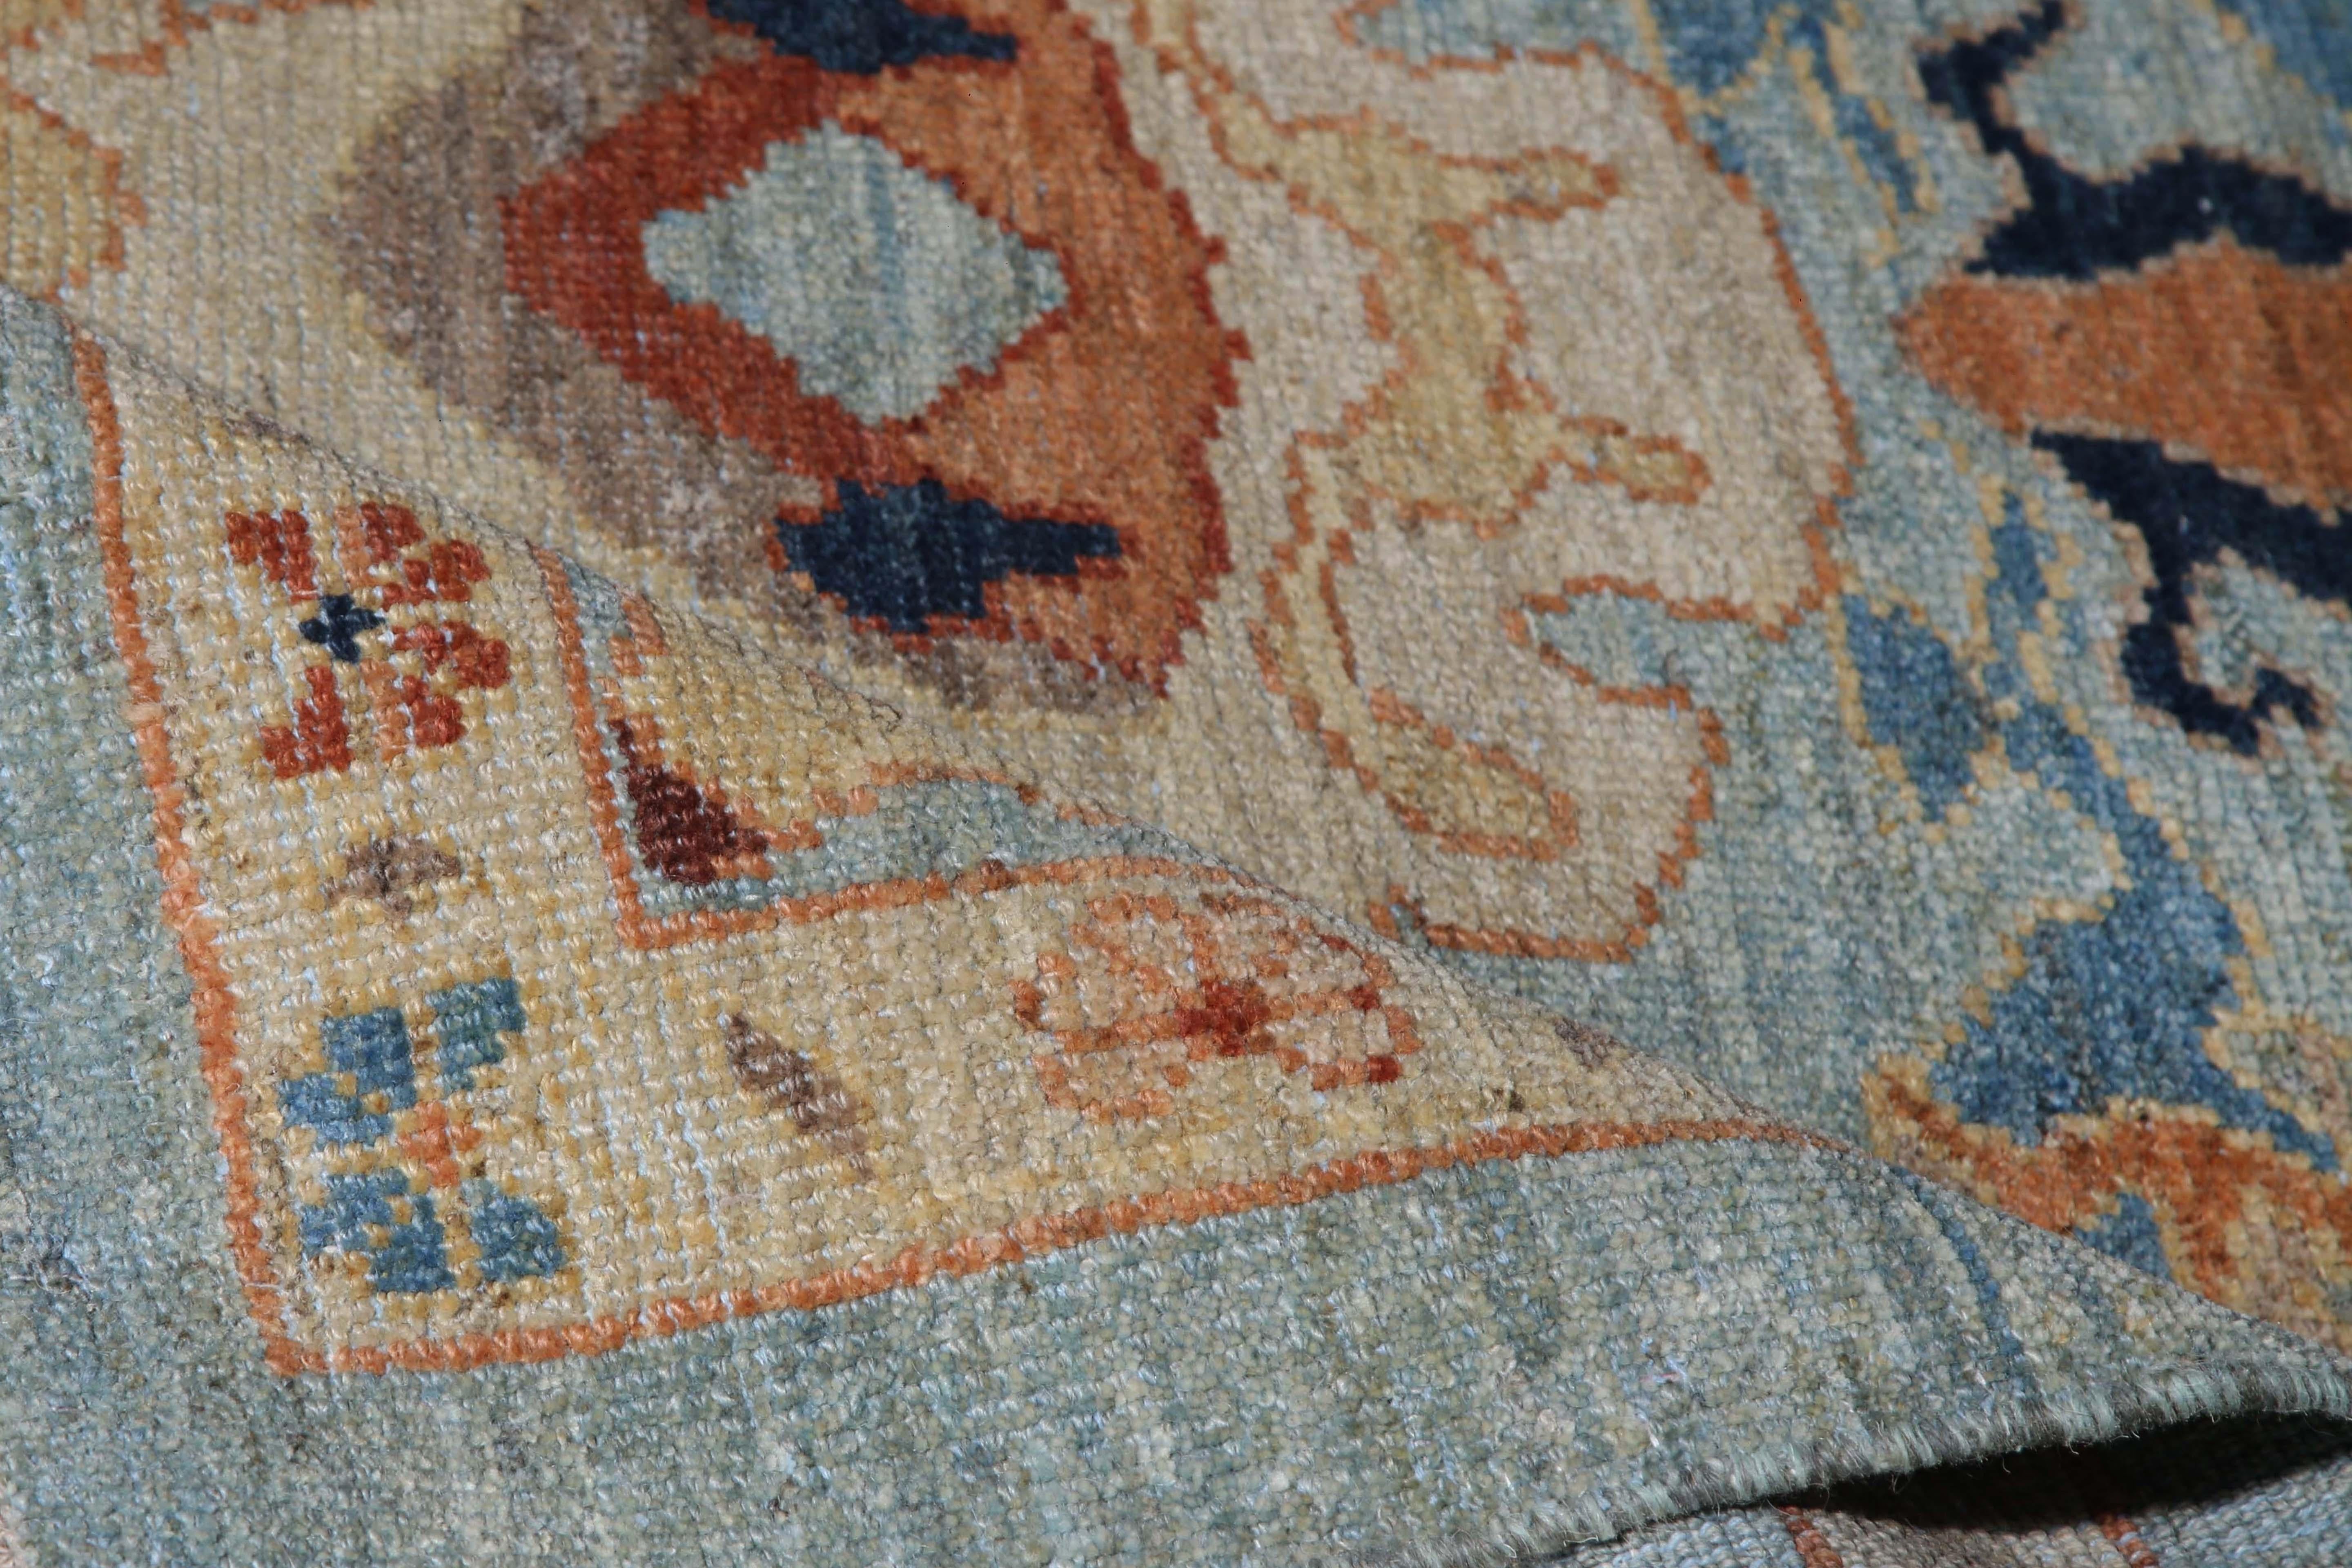 Introducing our exquisite handmade Turkish Sultanabad runner rug, measuring 3'6'' by 14'6''. This stunning rug features a light blue background that provides the perfect canvas for the vivid pops of color in its traditional design. The eye-catching